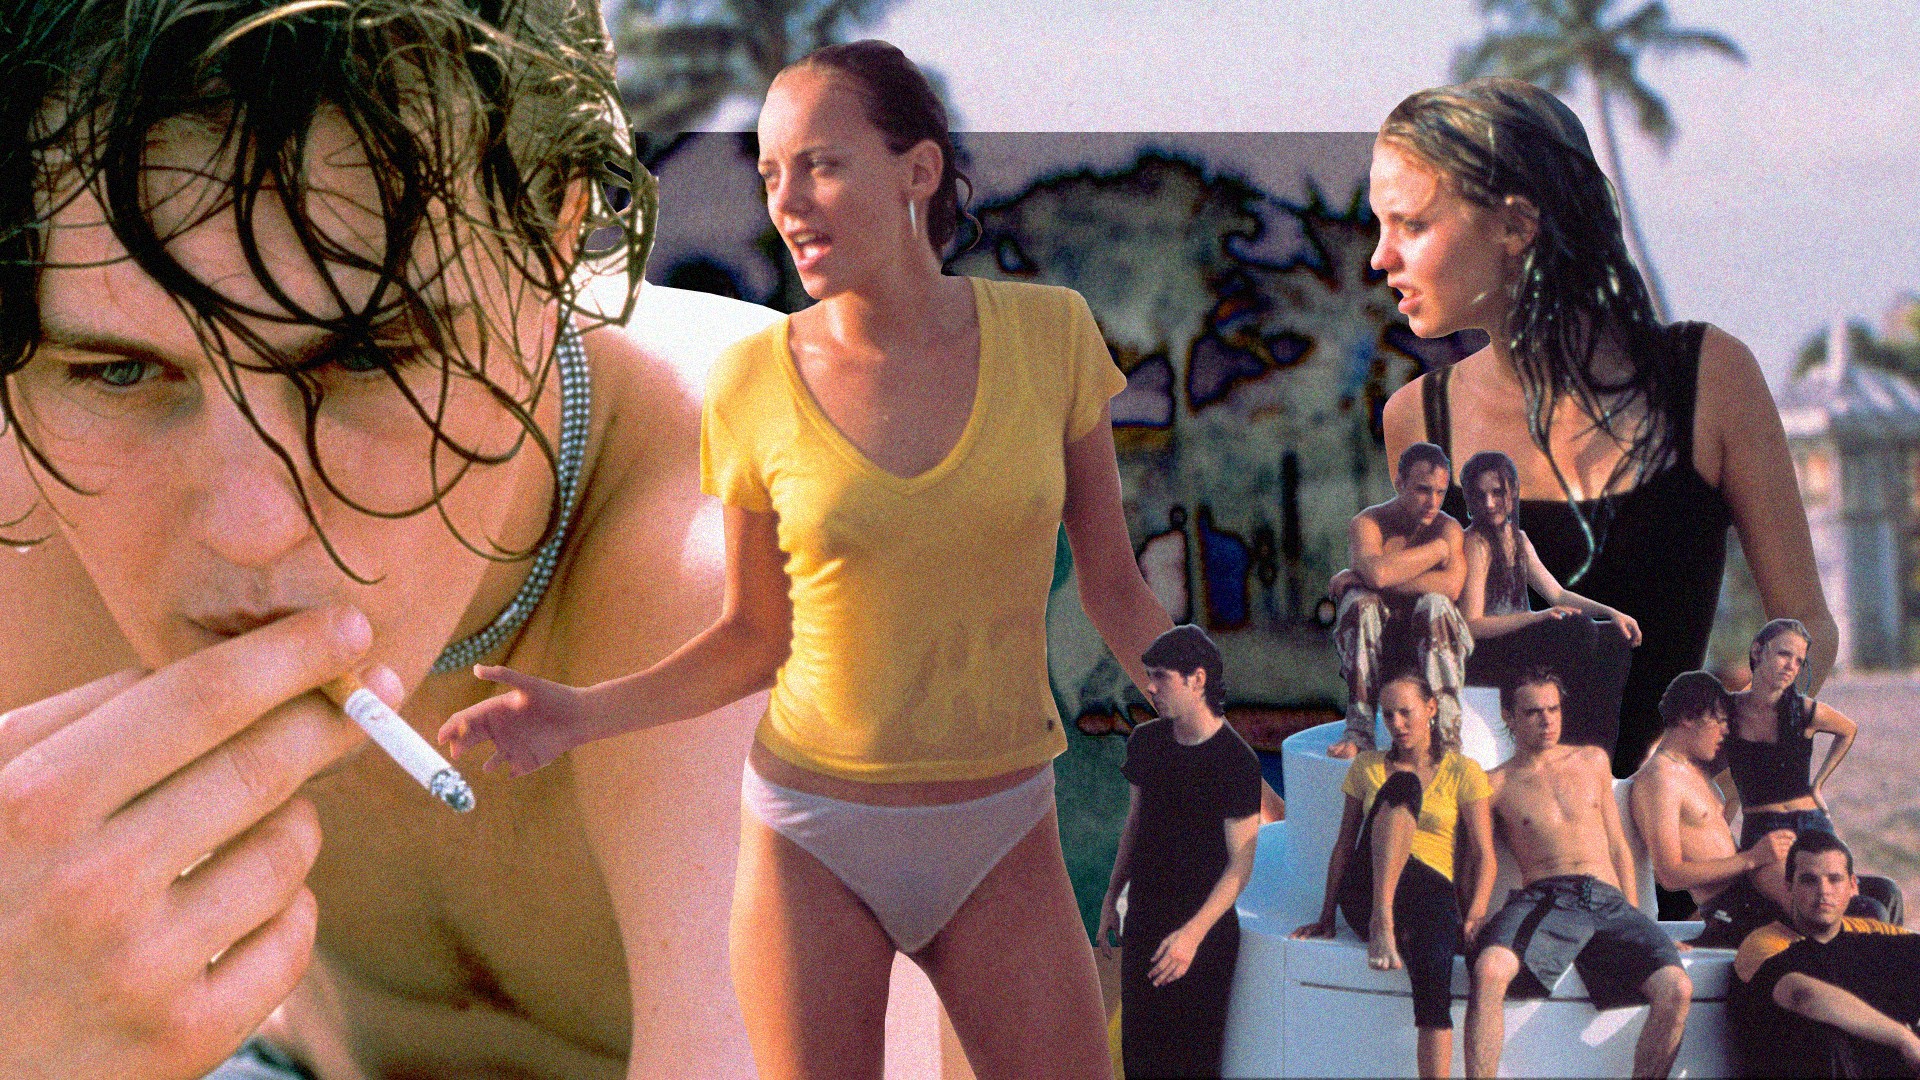 Daddy Fucks Daughter Nude Beach - Larry Clark's Bully: where are the cast now?